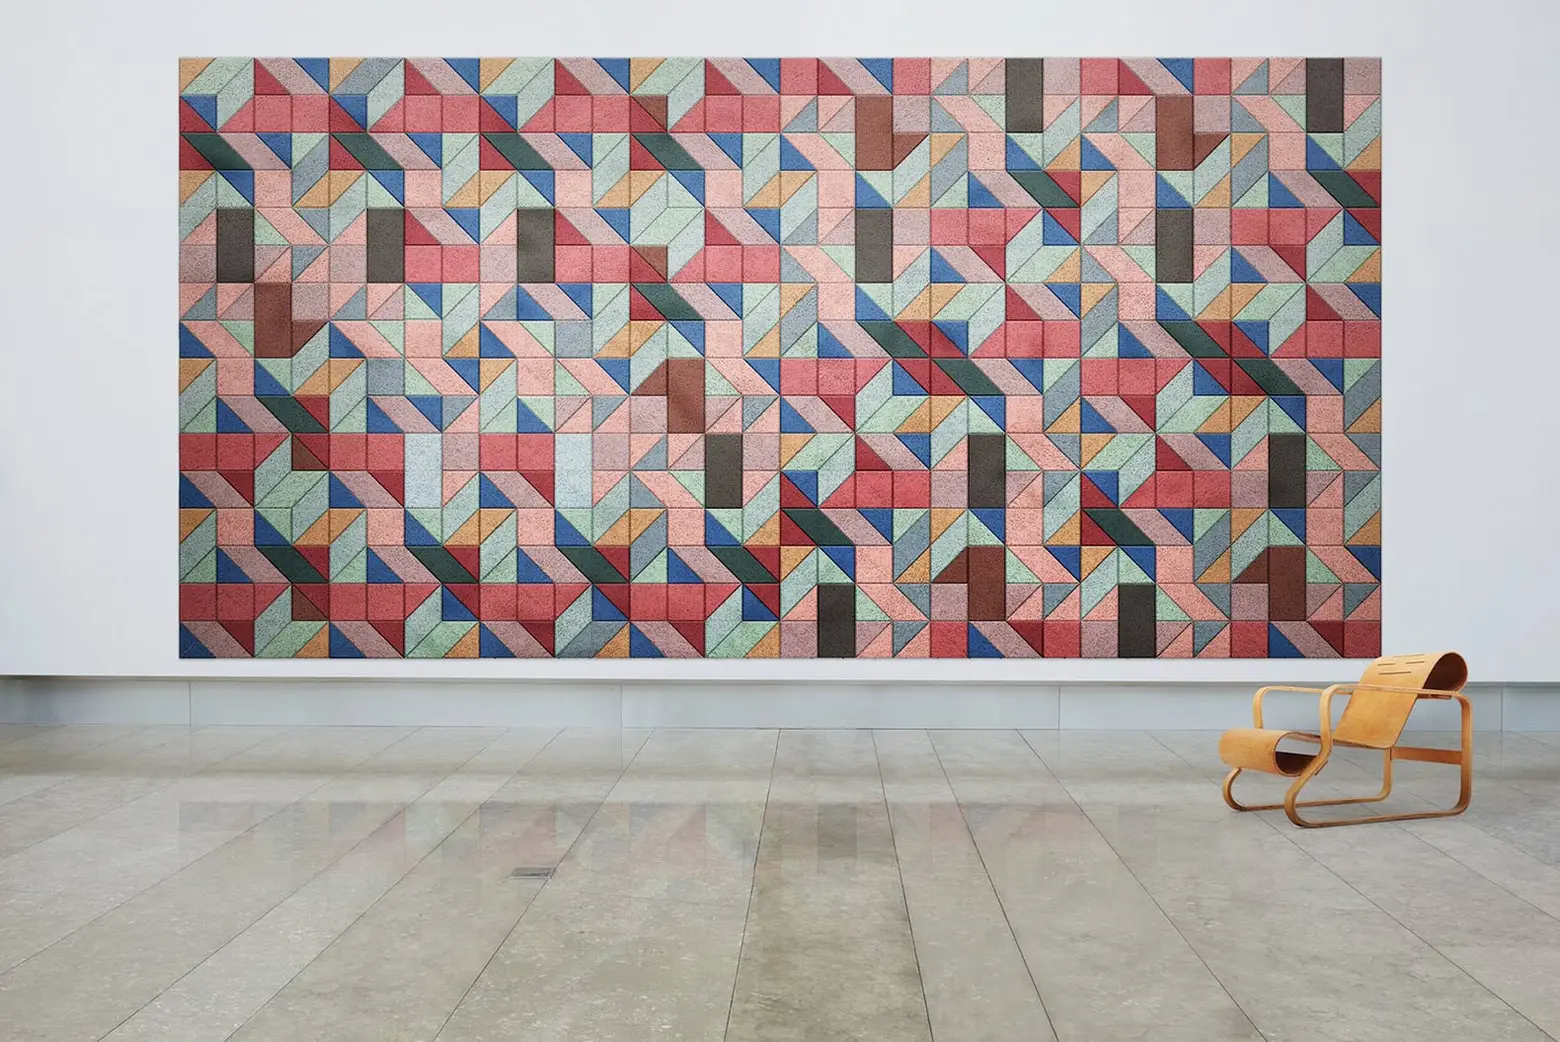 Geometric sound-absorbing wall panels are made from wood wool